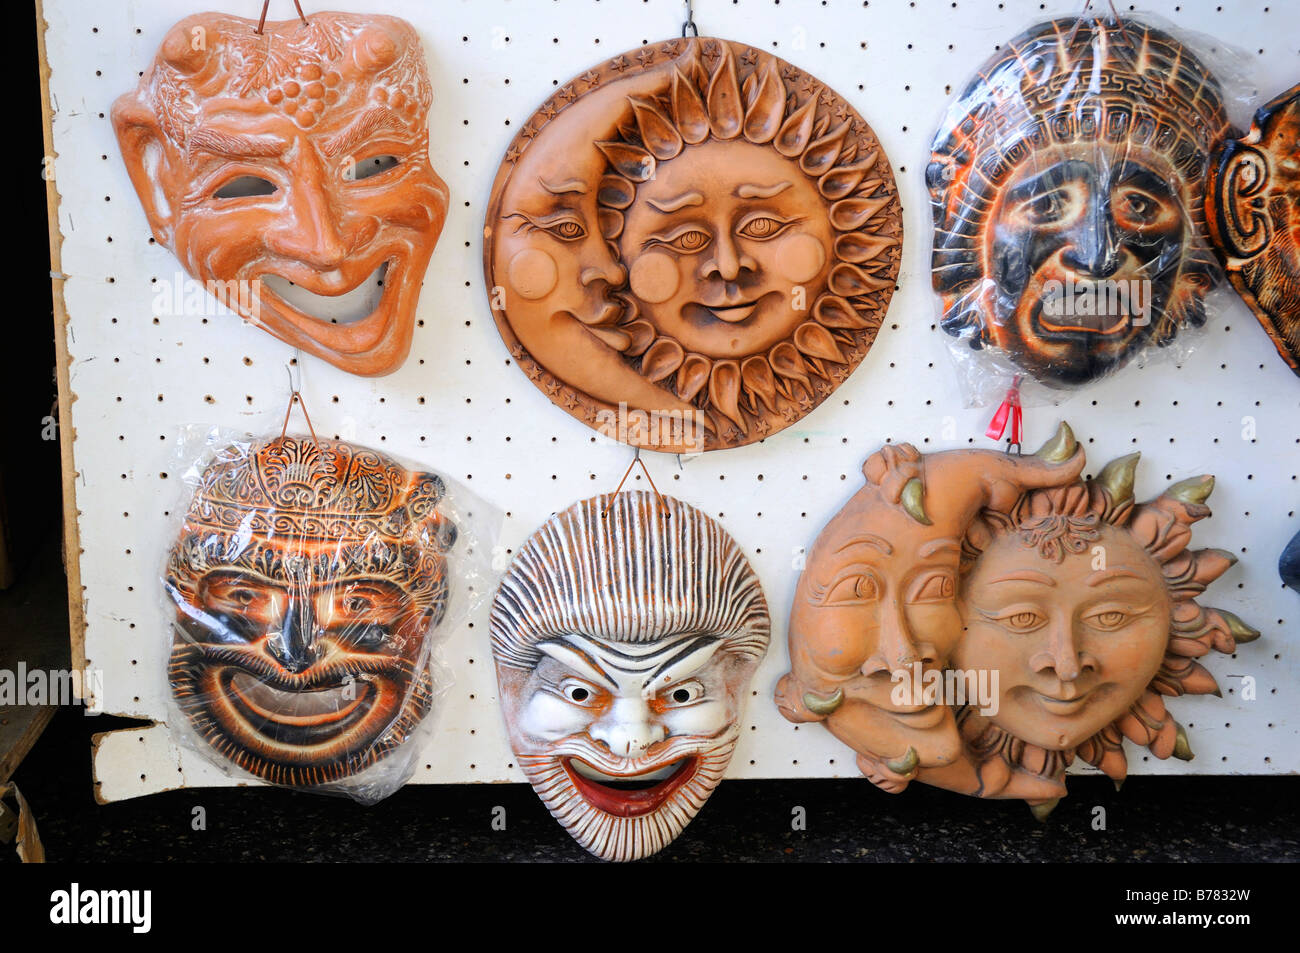 Typical Sicilian Pottery masks on sale at Greek theatre site in Siracuse Sicily Stock Photo